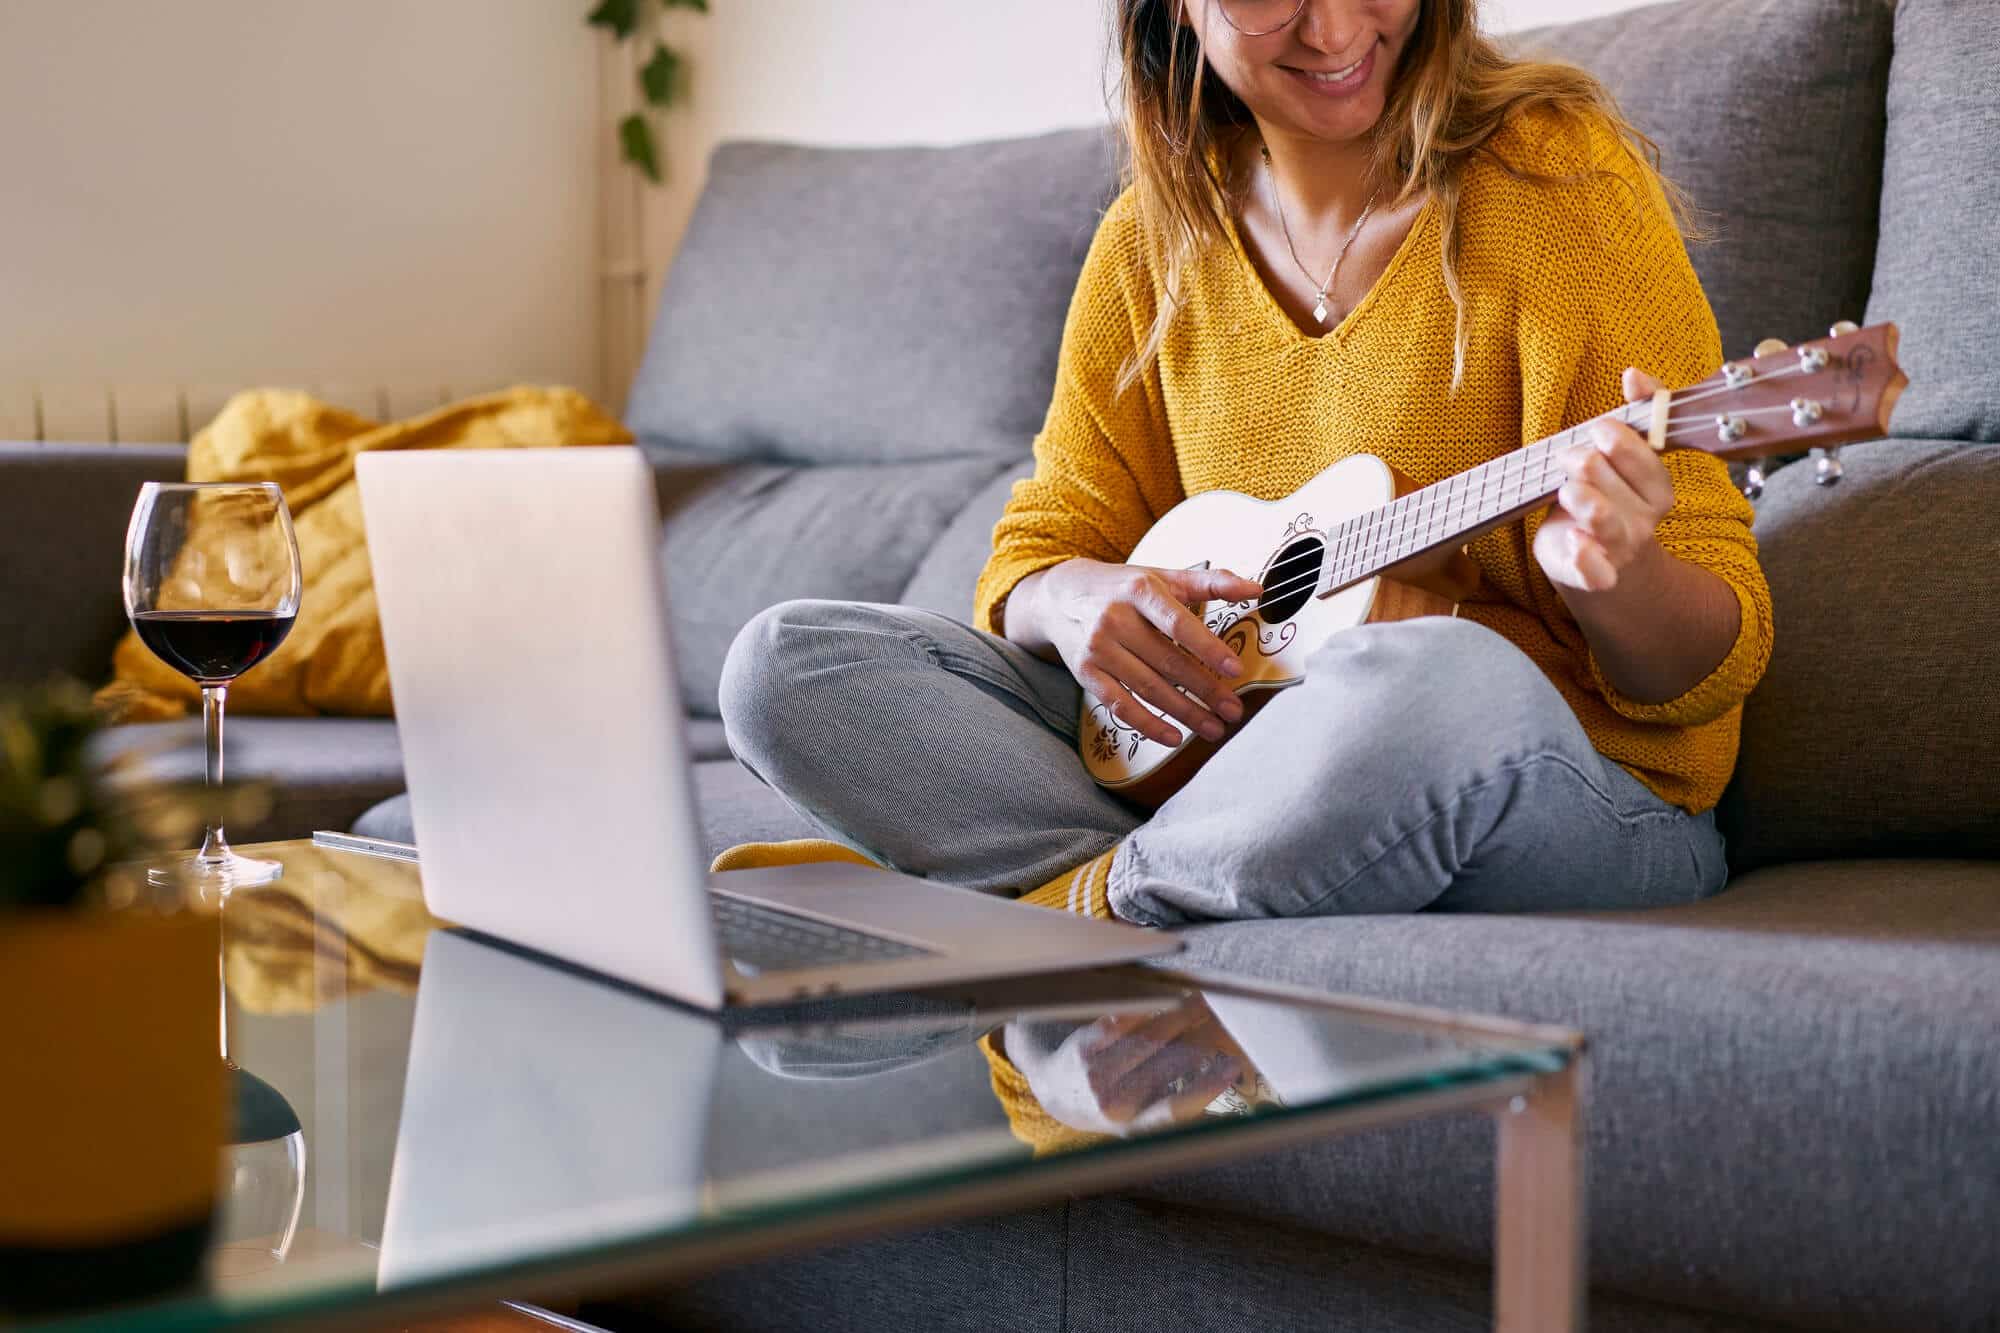 Live 1 on 1 Private Online Music Lessons In Your Home